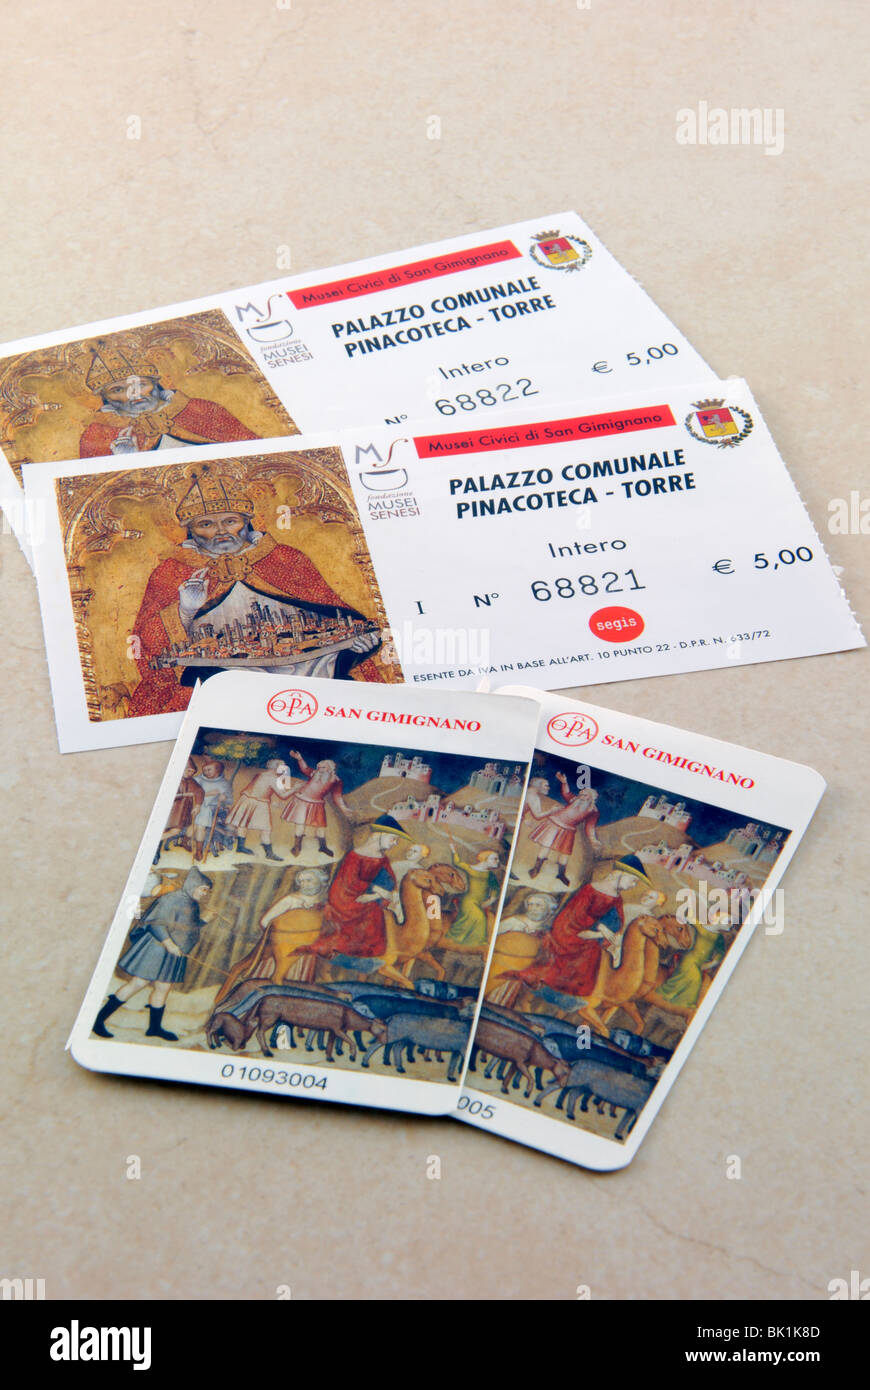 Two entrance tickets to two main sights of the San Gimignano. Palazzo Comunale has Pinacoteca, which has paintings from Sienese Stock Photo